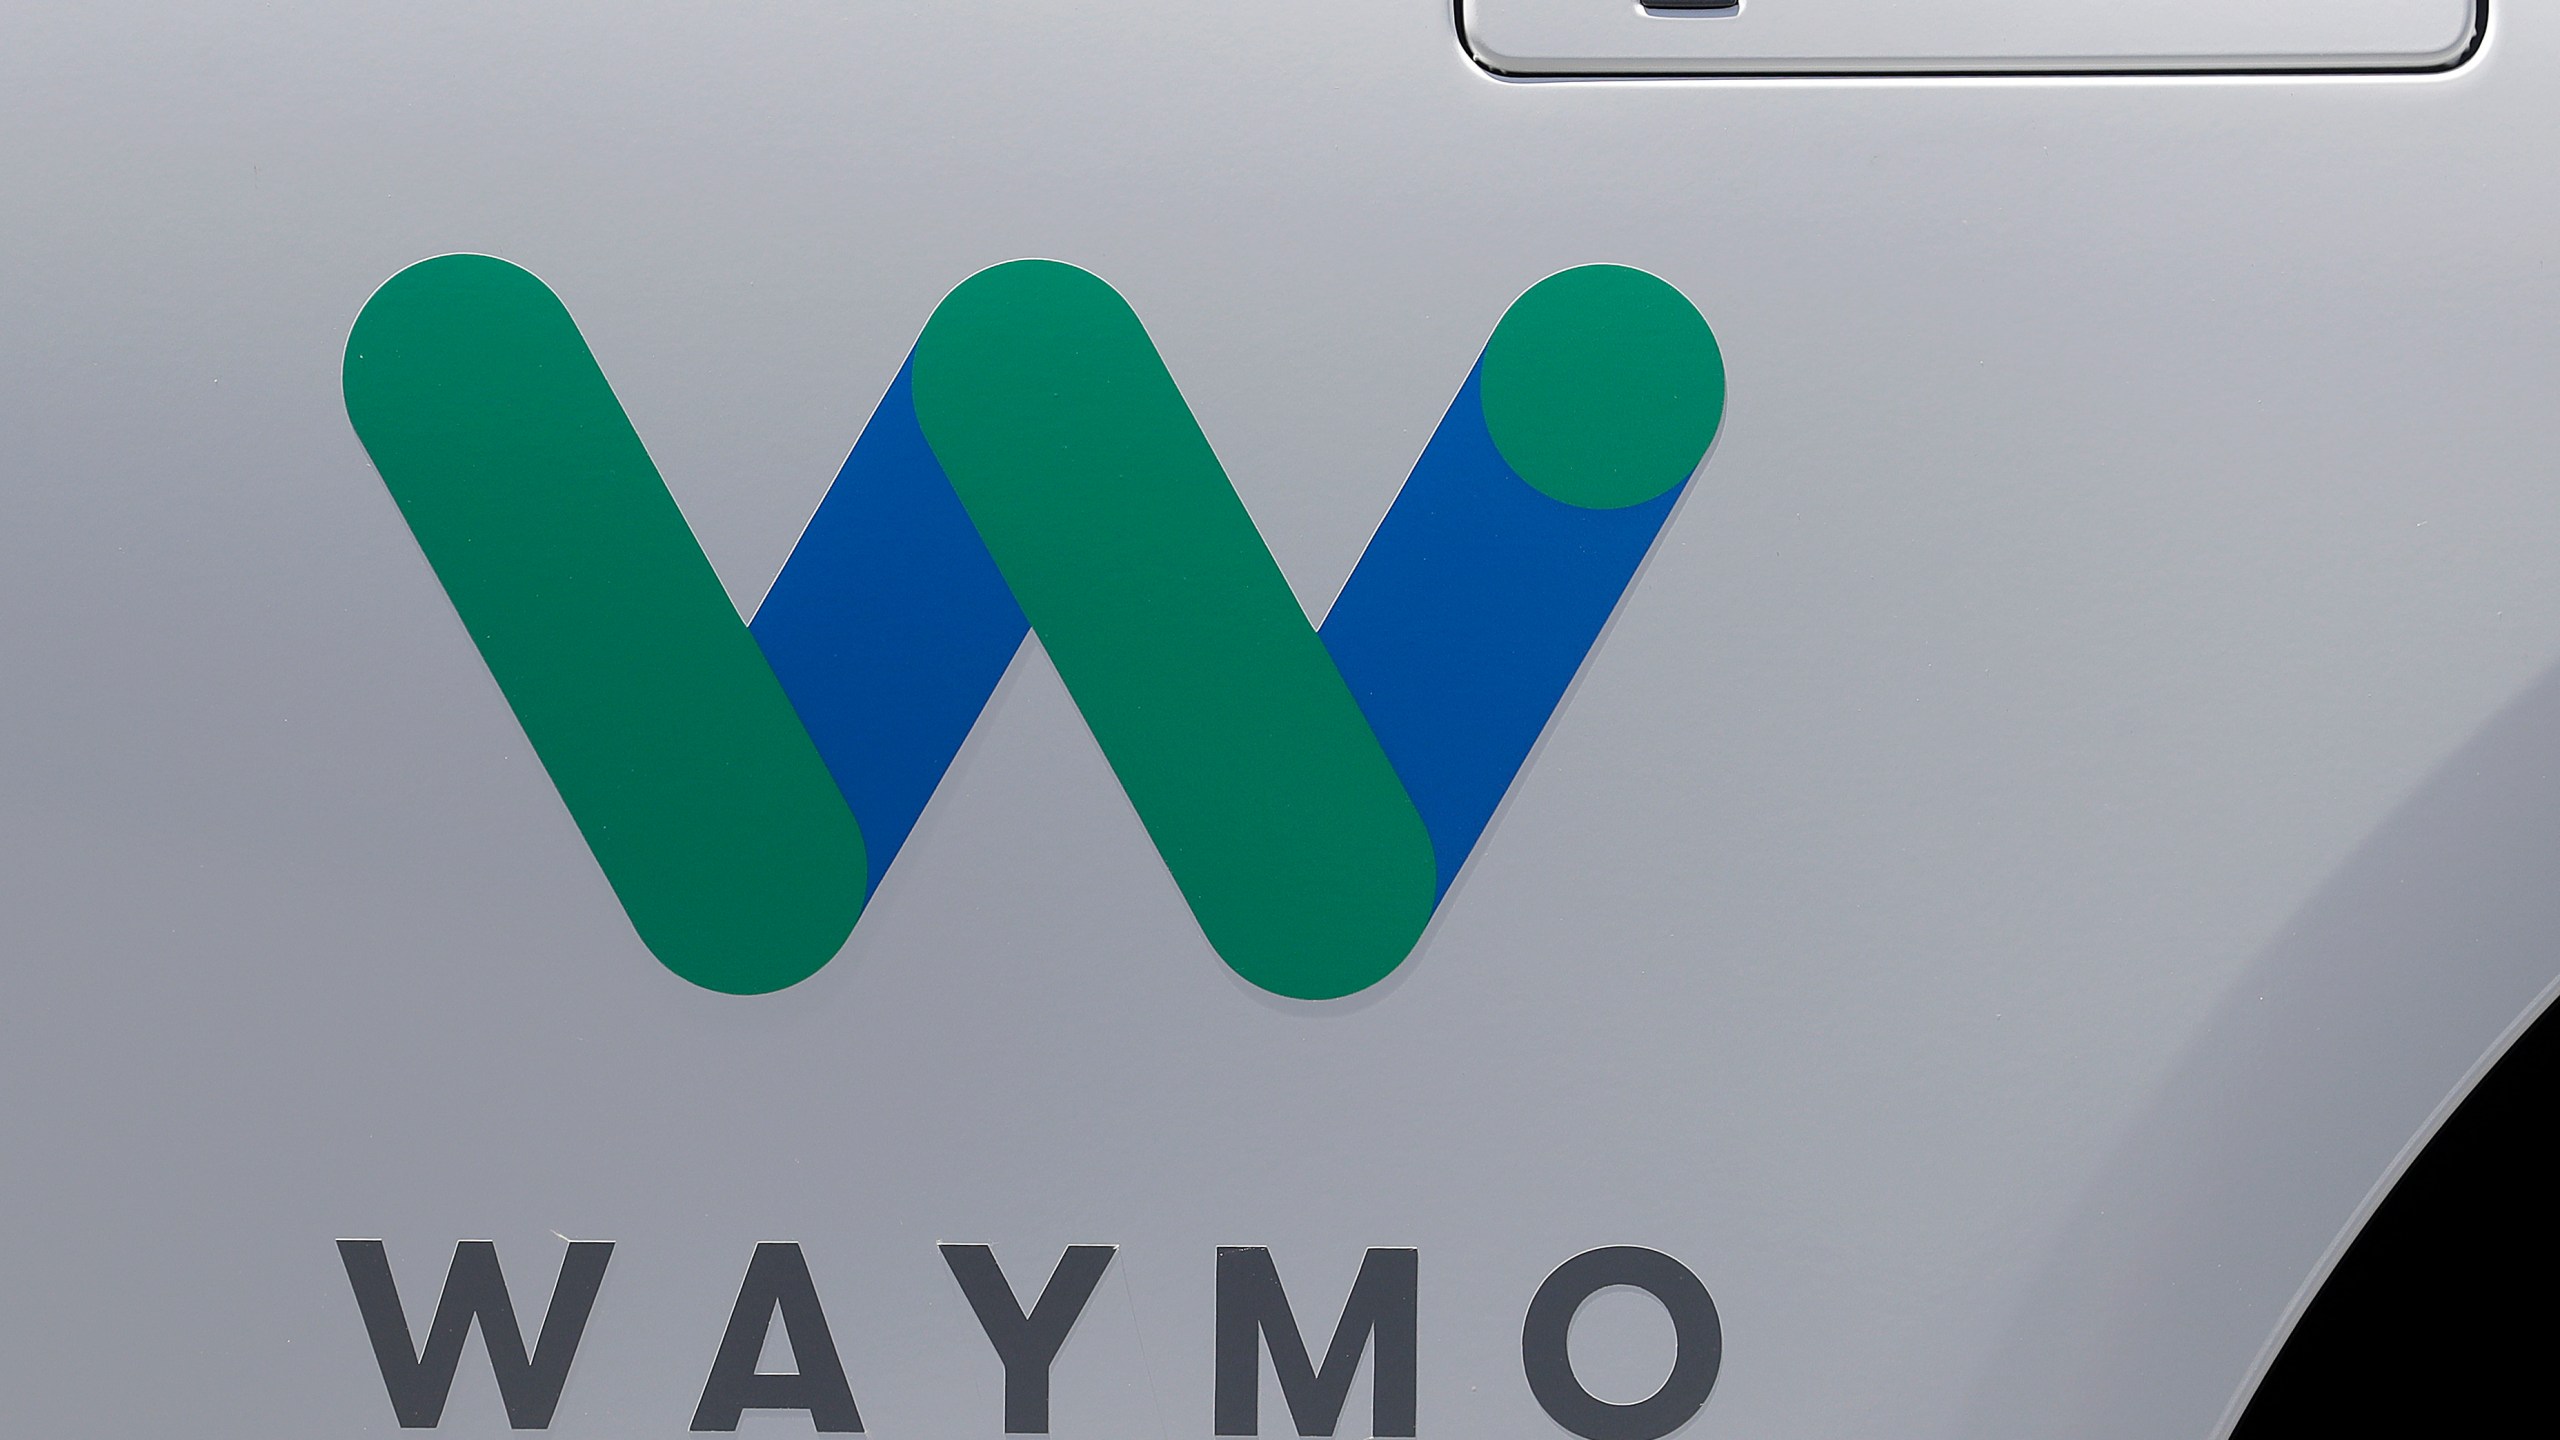 FILE - In this May 8, 2018, file photo, a Waymo logo is displayed on the door of a car at the Google I/O conference in Mountain View, Calif. Robotaxis are hitting the streets of Los Angeles. Google spinoff Waymo says on Thursday, March 14, 2024 it will begin offering free rides to a some of the roughly 50,000 people who have signed up for its driverless ride-hailing service in the second largest U.S. city. (AP Photo/Jeff Chiu, File)